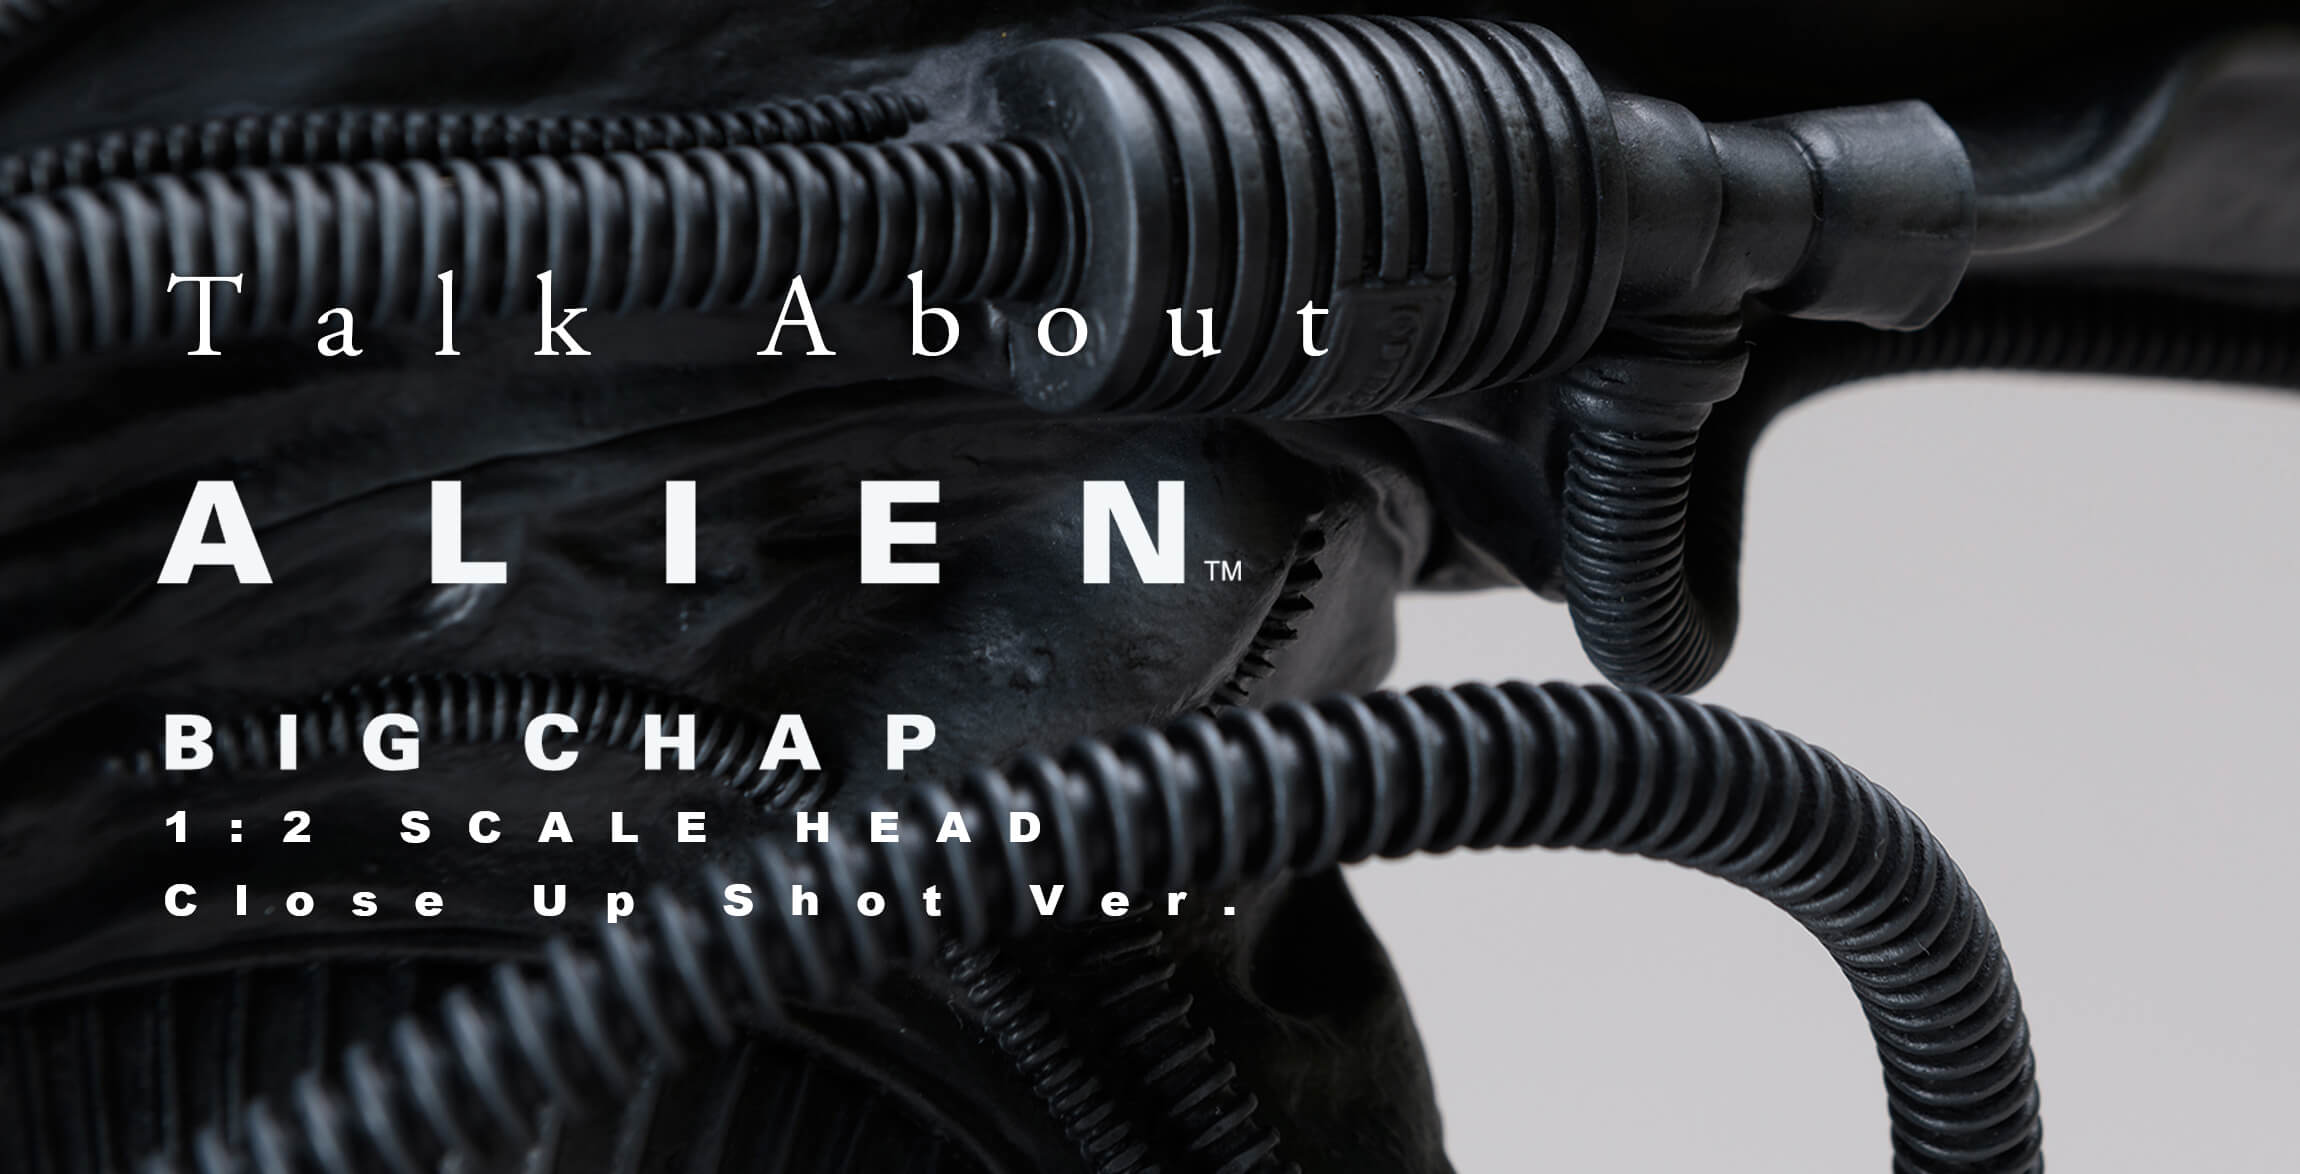 ALIEN BIG CHAP 1/2 SCALE HEAD Close Up Shot Ver.│Presented by